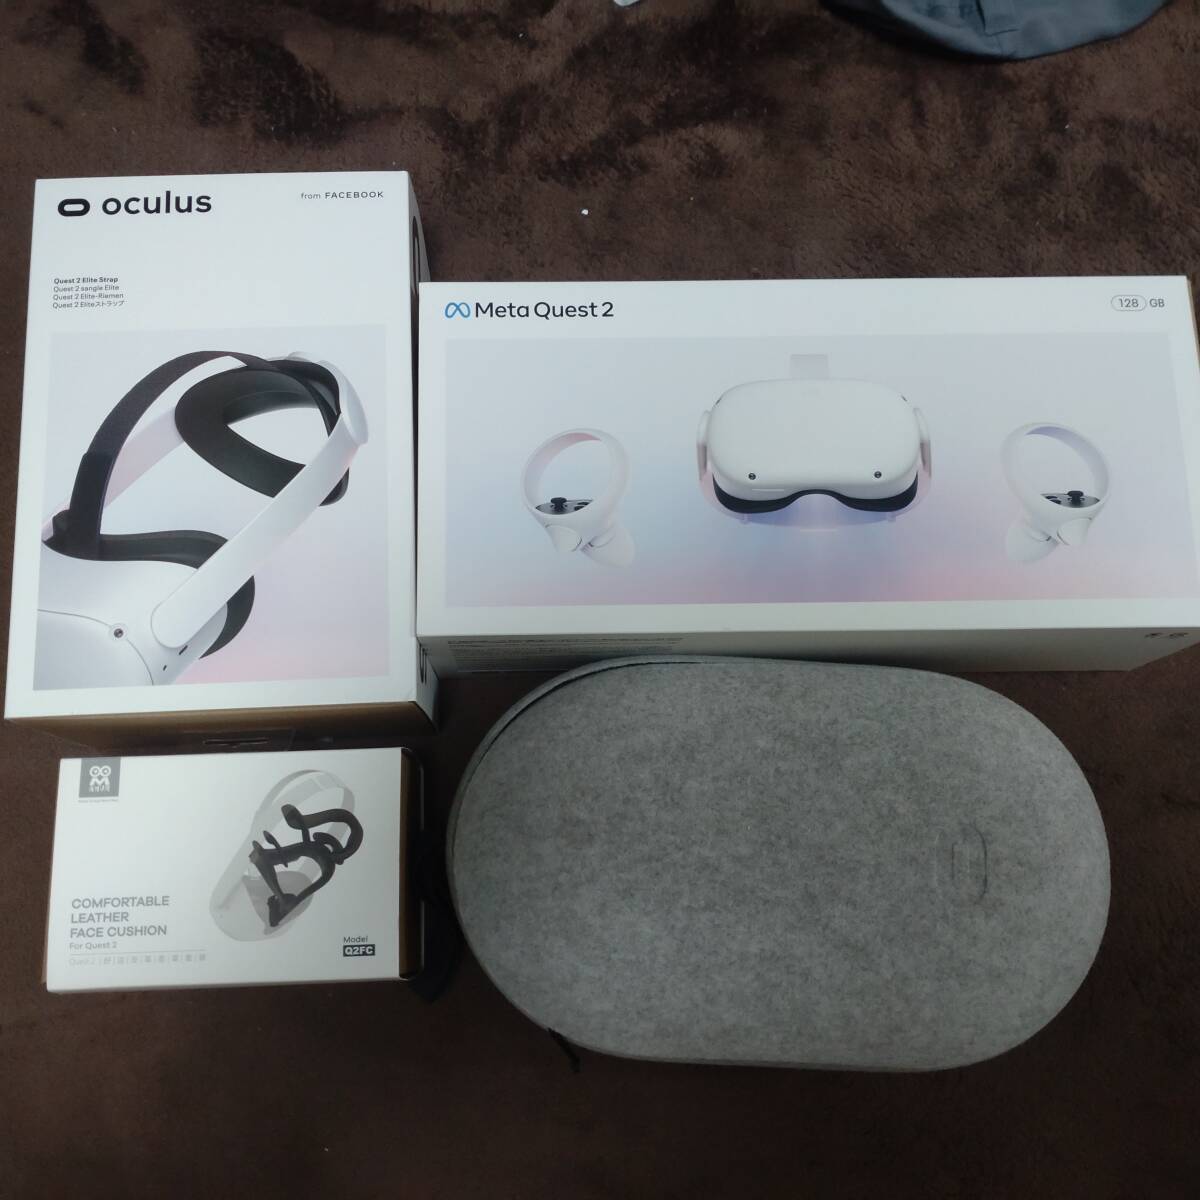 Meta Quest2 128GBmeta Quest 2 VR head mounted display electrification verification OKokyulas accessory have Q2FC Erite case present condition goods.